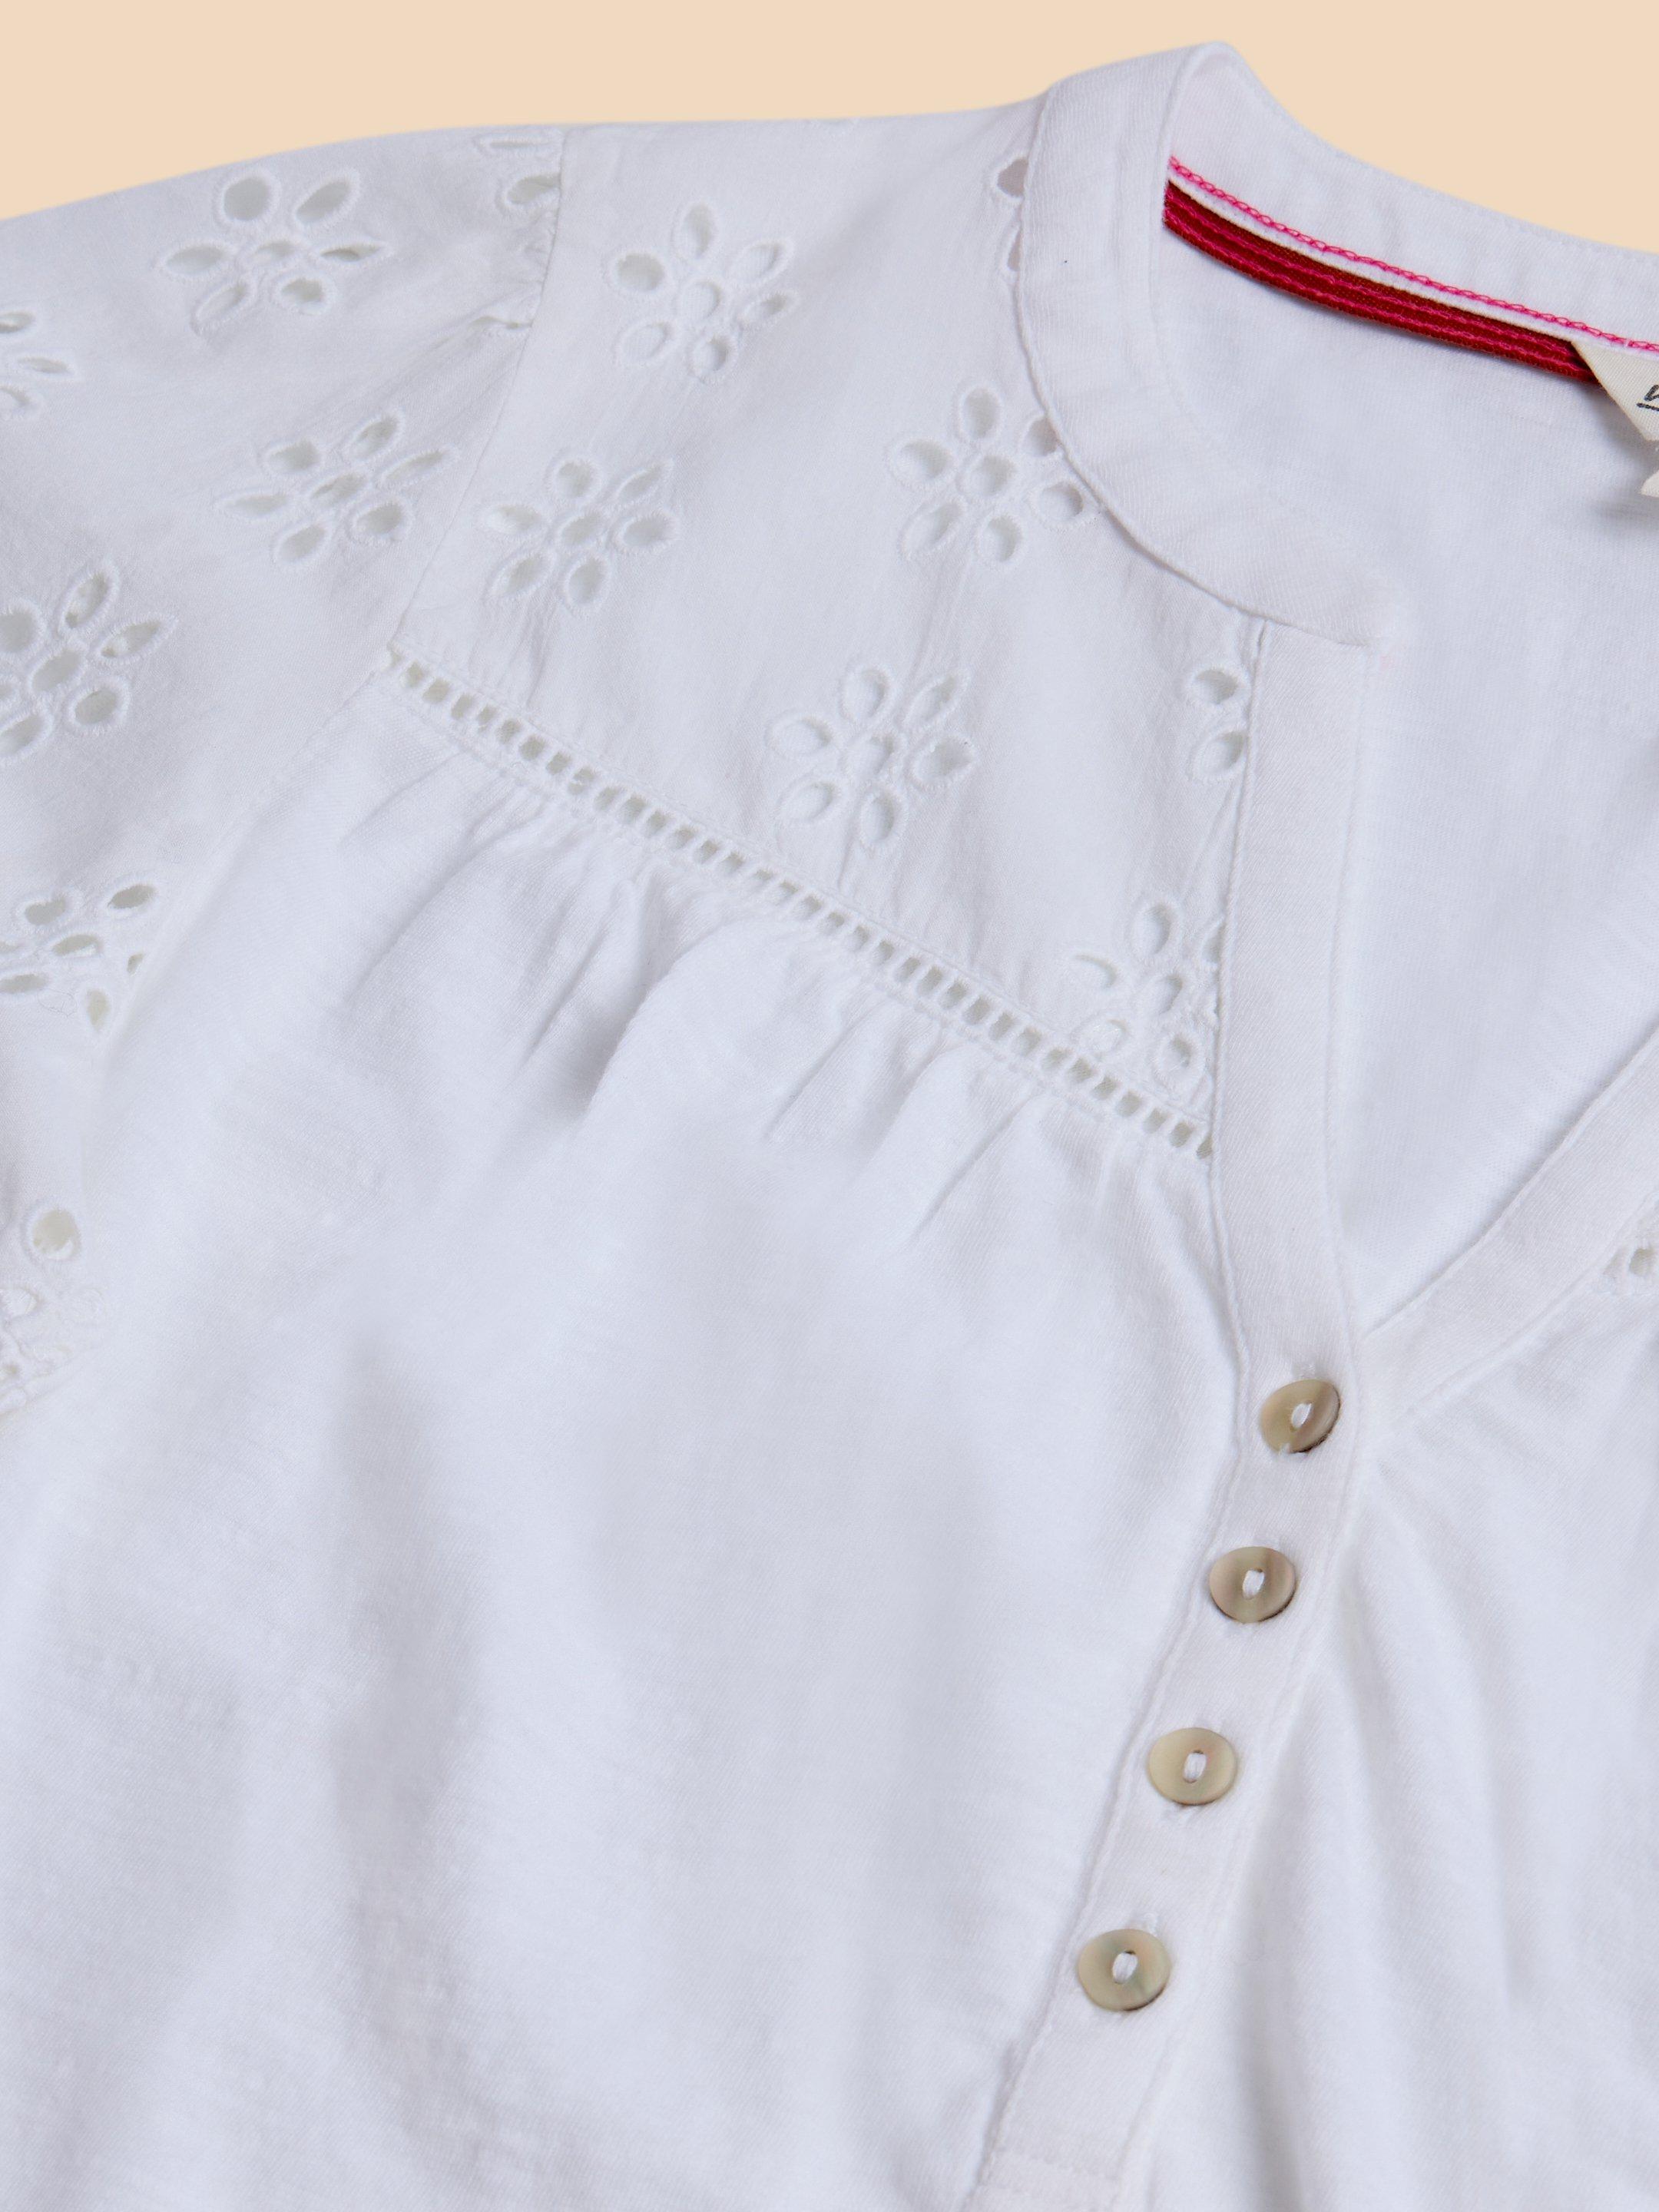 BELLA BRODERIE MIX TOP in BRIL WHITE - FLAT DETAIL